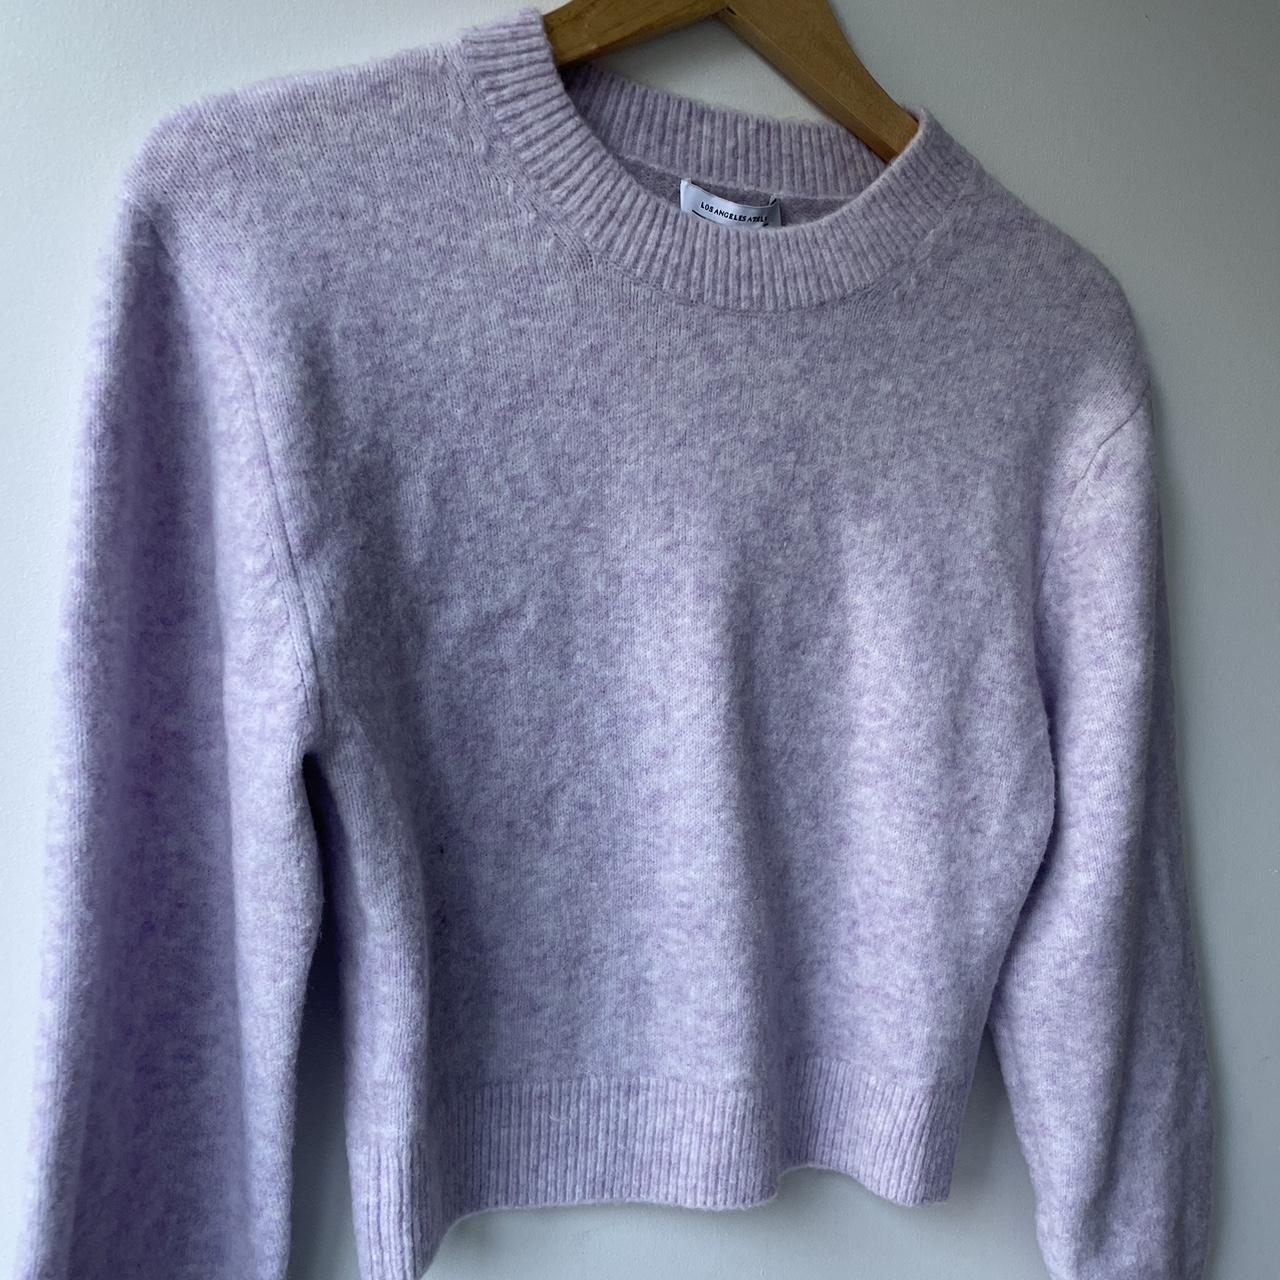 And Other Stories - small comfy jumper - Depop